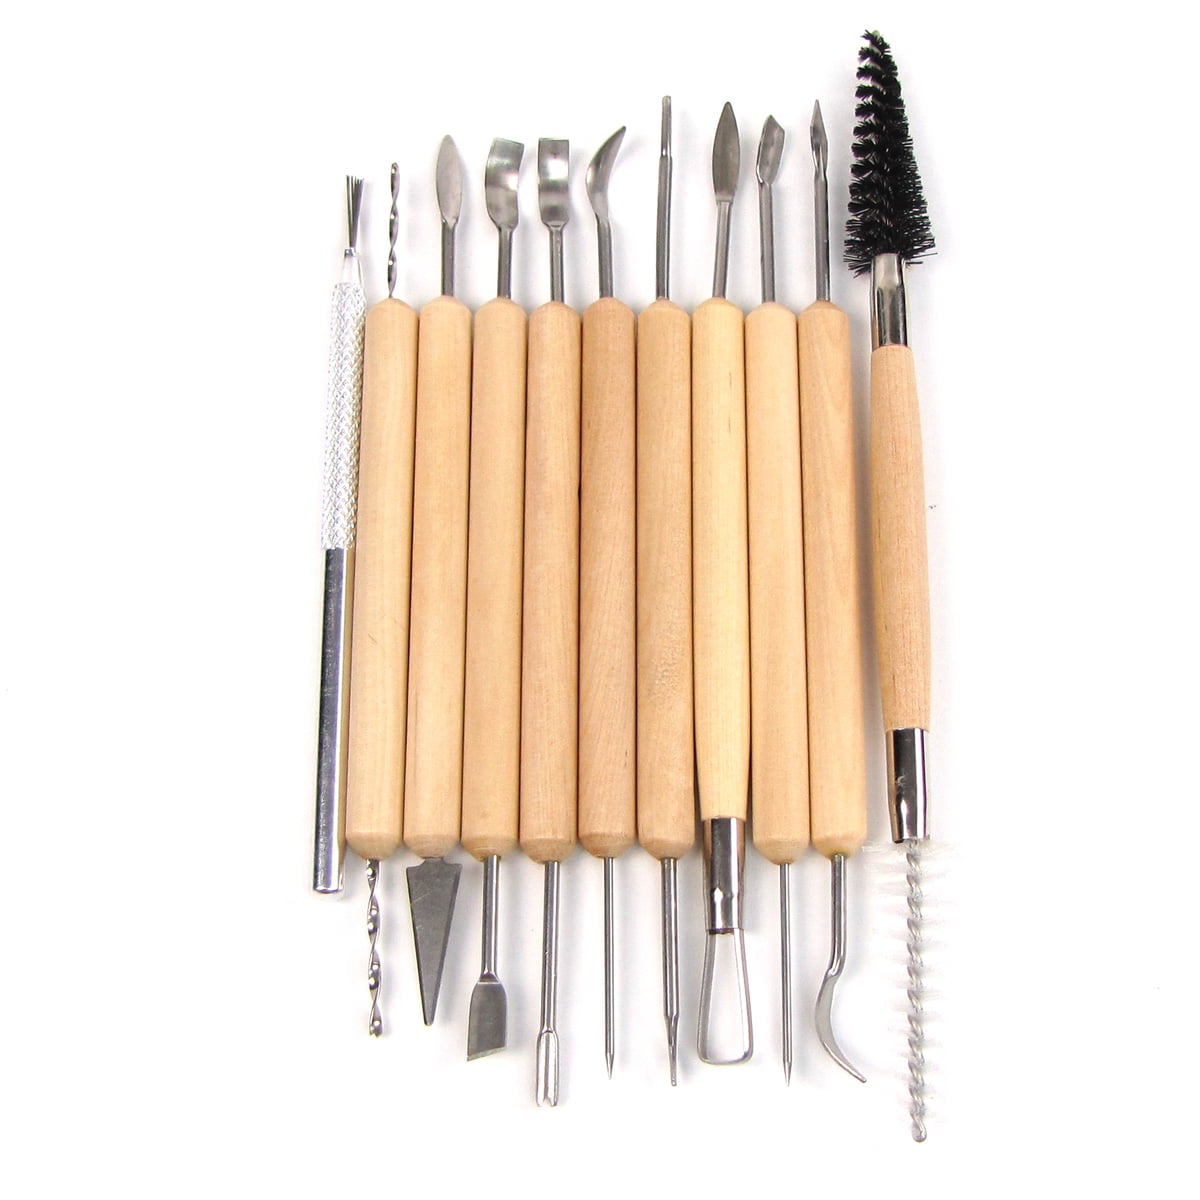 single stainless steel wax soap clay modelling carving chisels tools pick & mix 